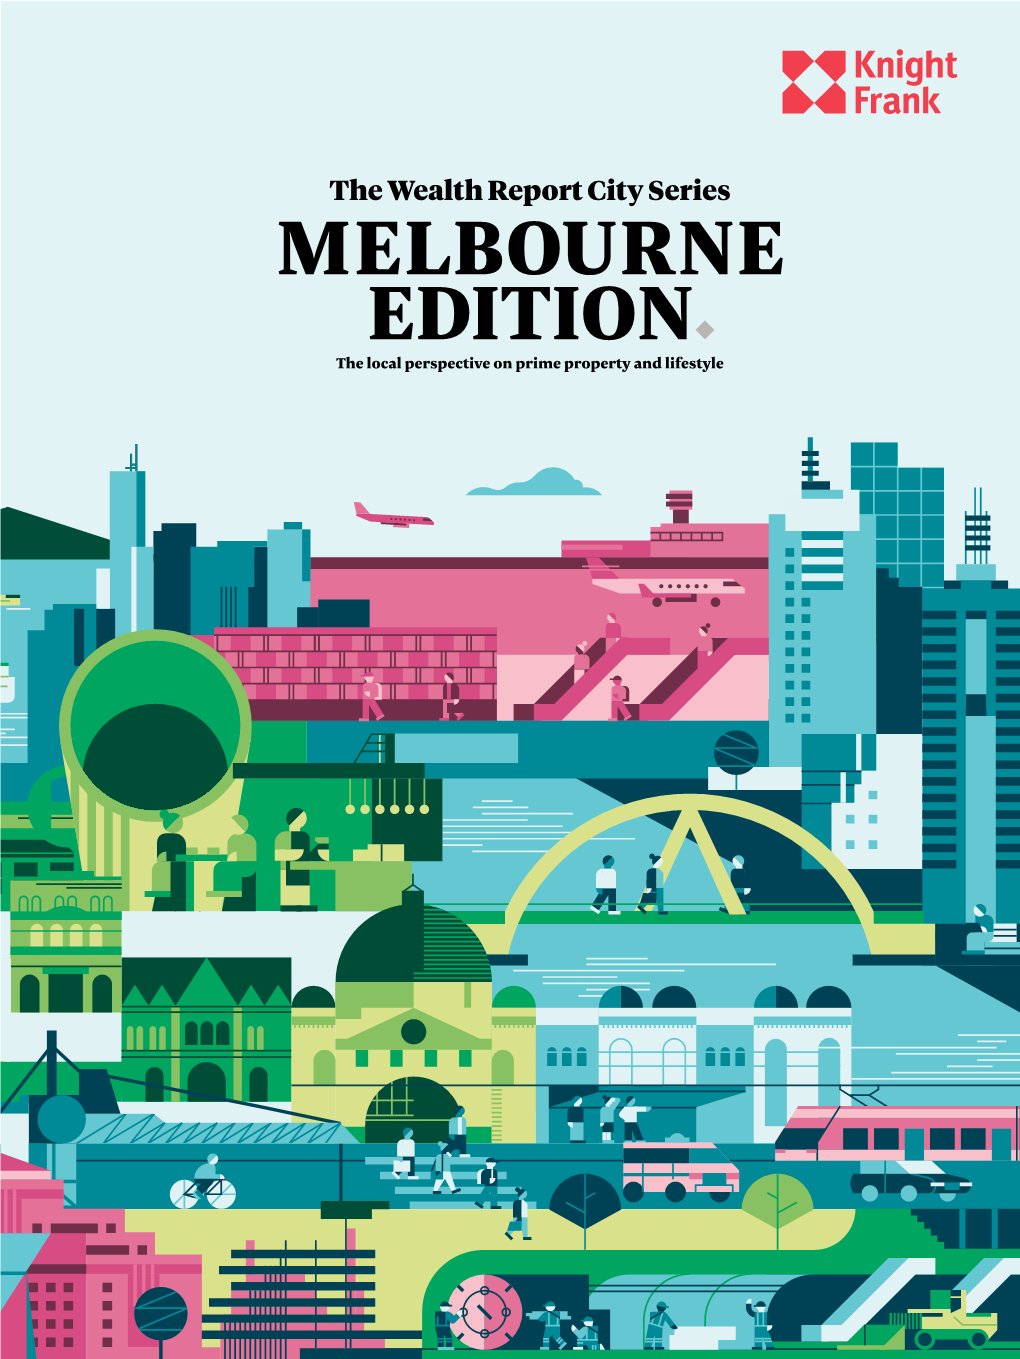 MELBOURNE EDITION the Local Perspective on Prime Property and Lifestyle